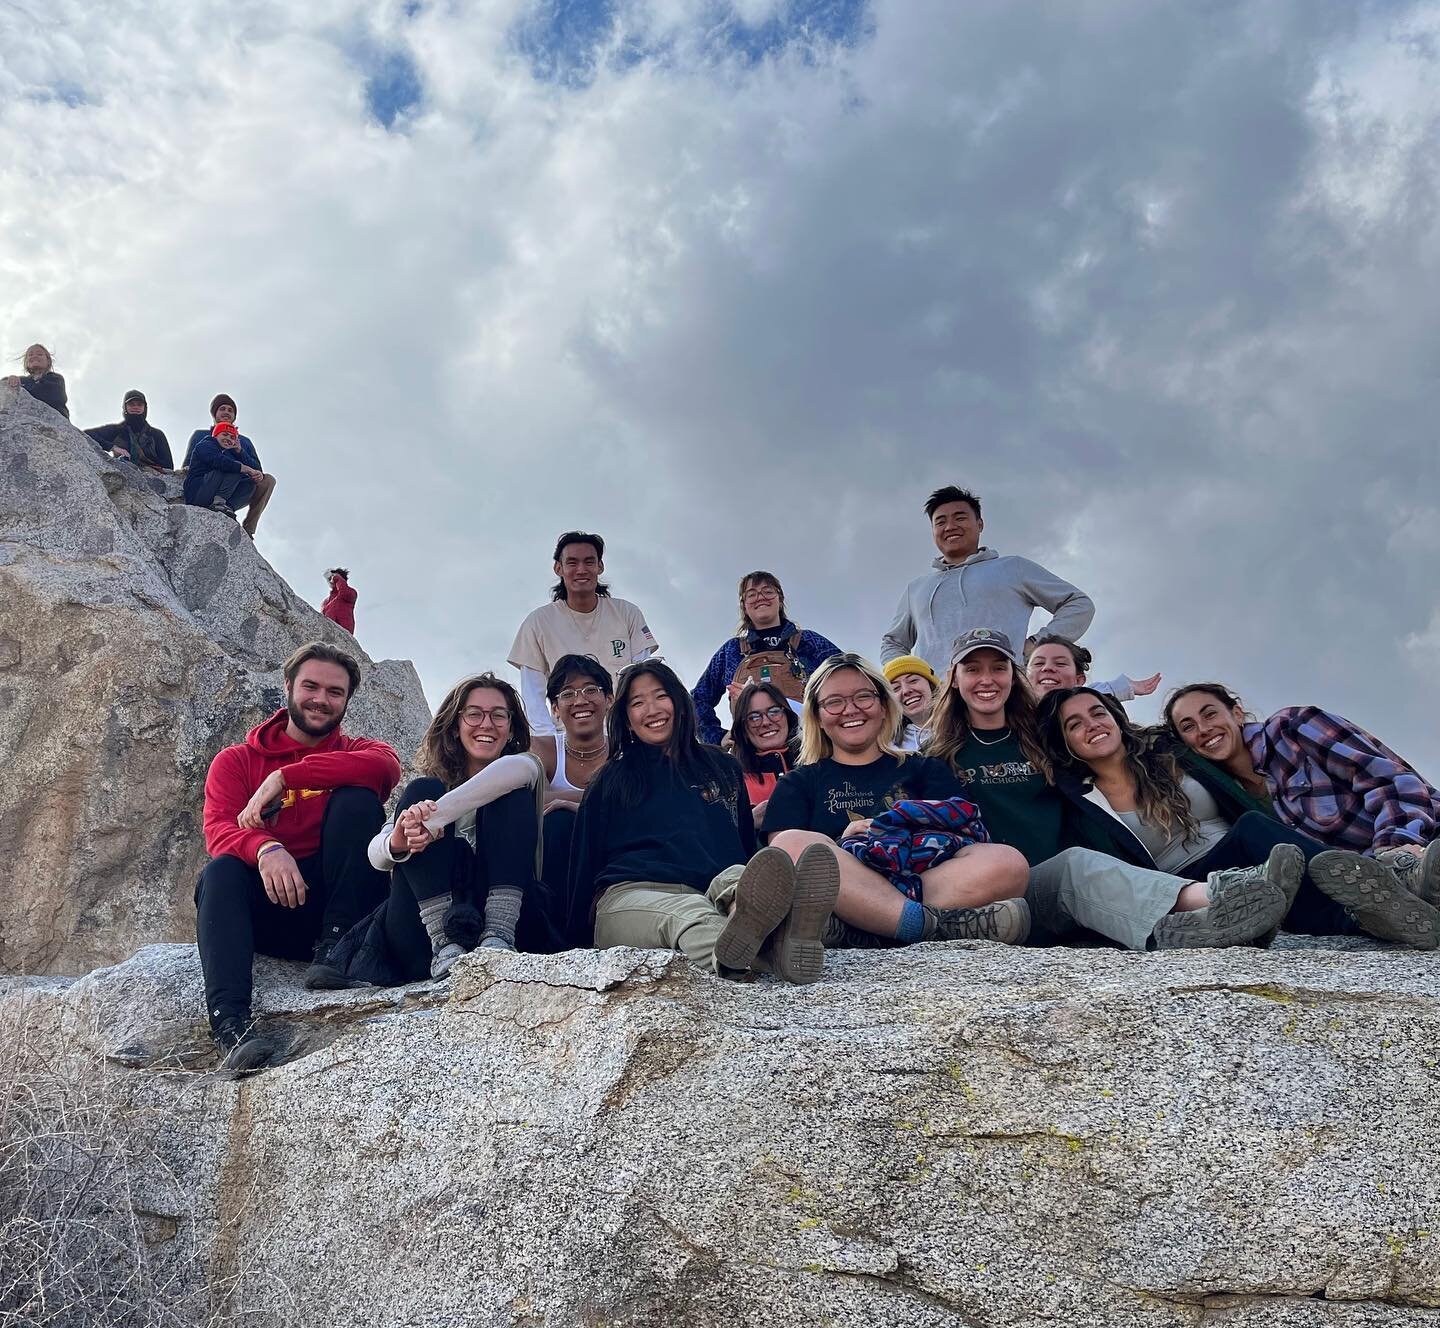 🪨rock scrambling? Heck yeah!
🍳🥘cooking competition? You know it!
🤼wrestling ring? Not sure how it happened, but&hellip;

Guides can hang! Our guide community had a great time at our retreat this past weekend at Lake Isabella. A welcoming, support